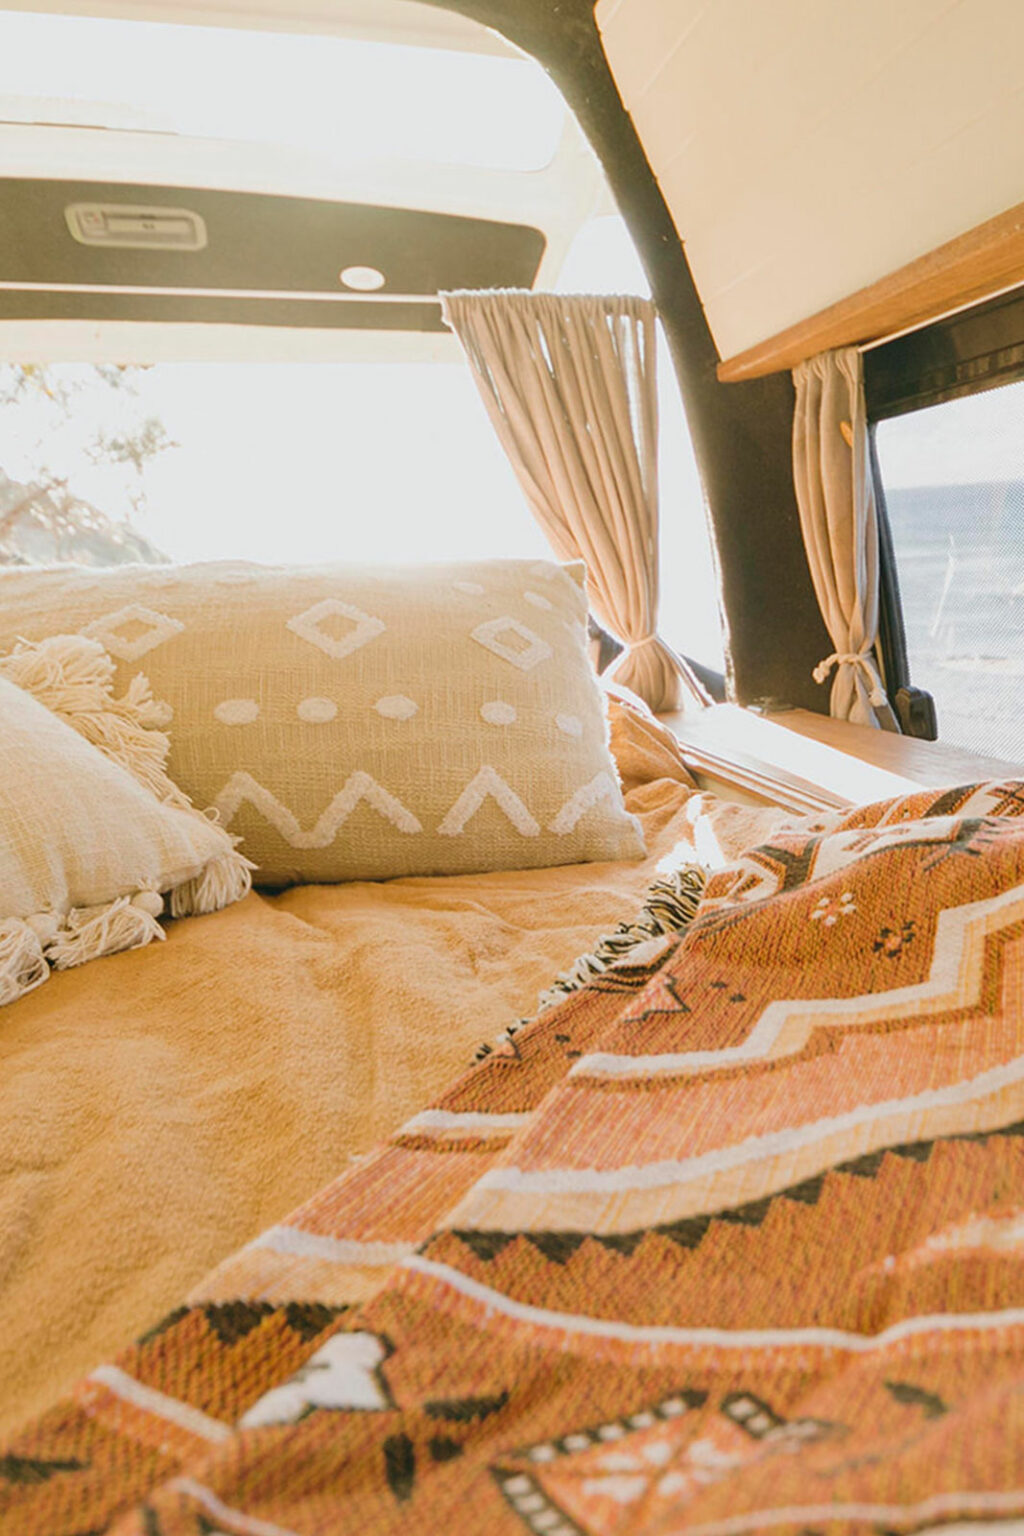 Campervan interior with bed and curtains